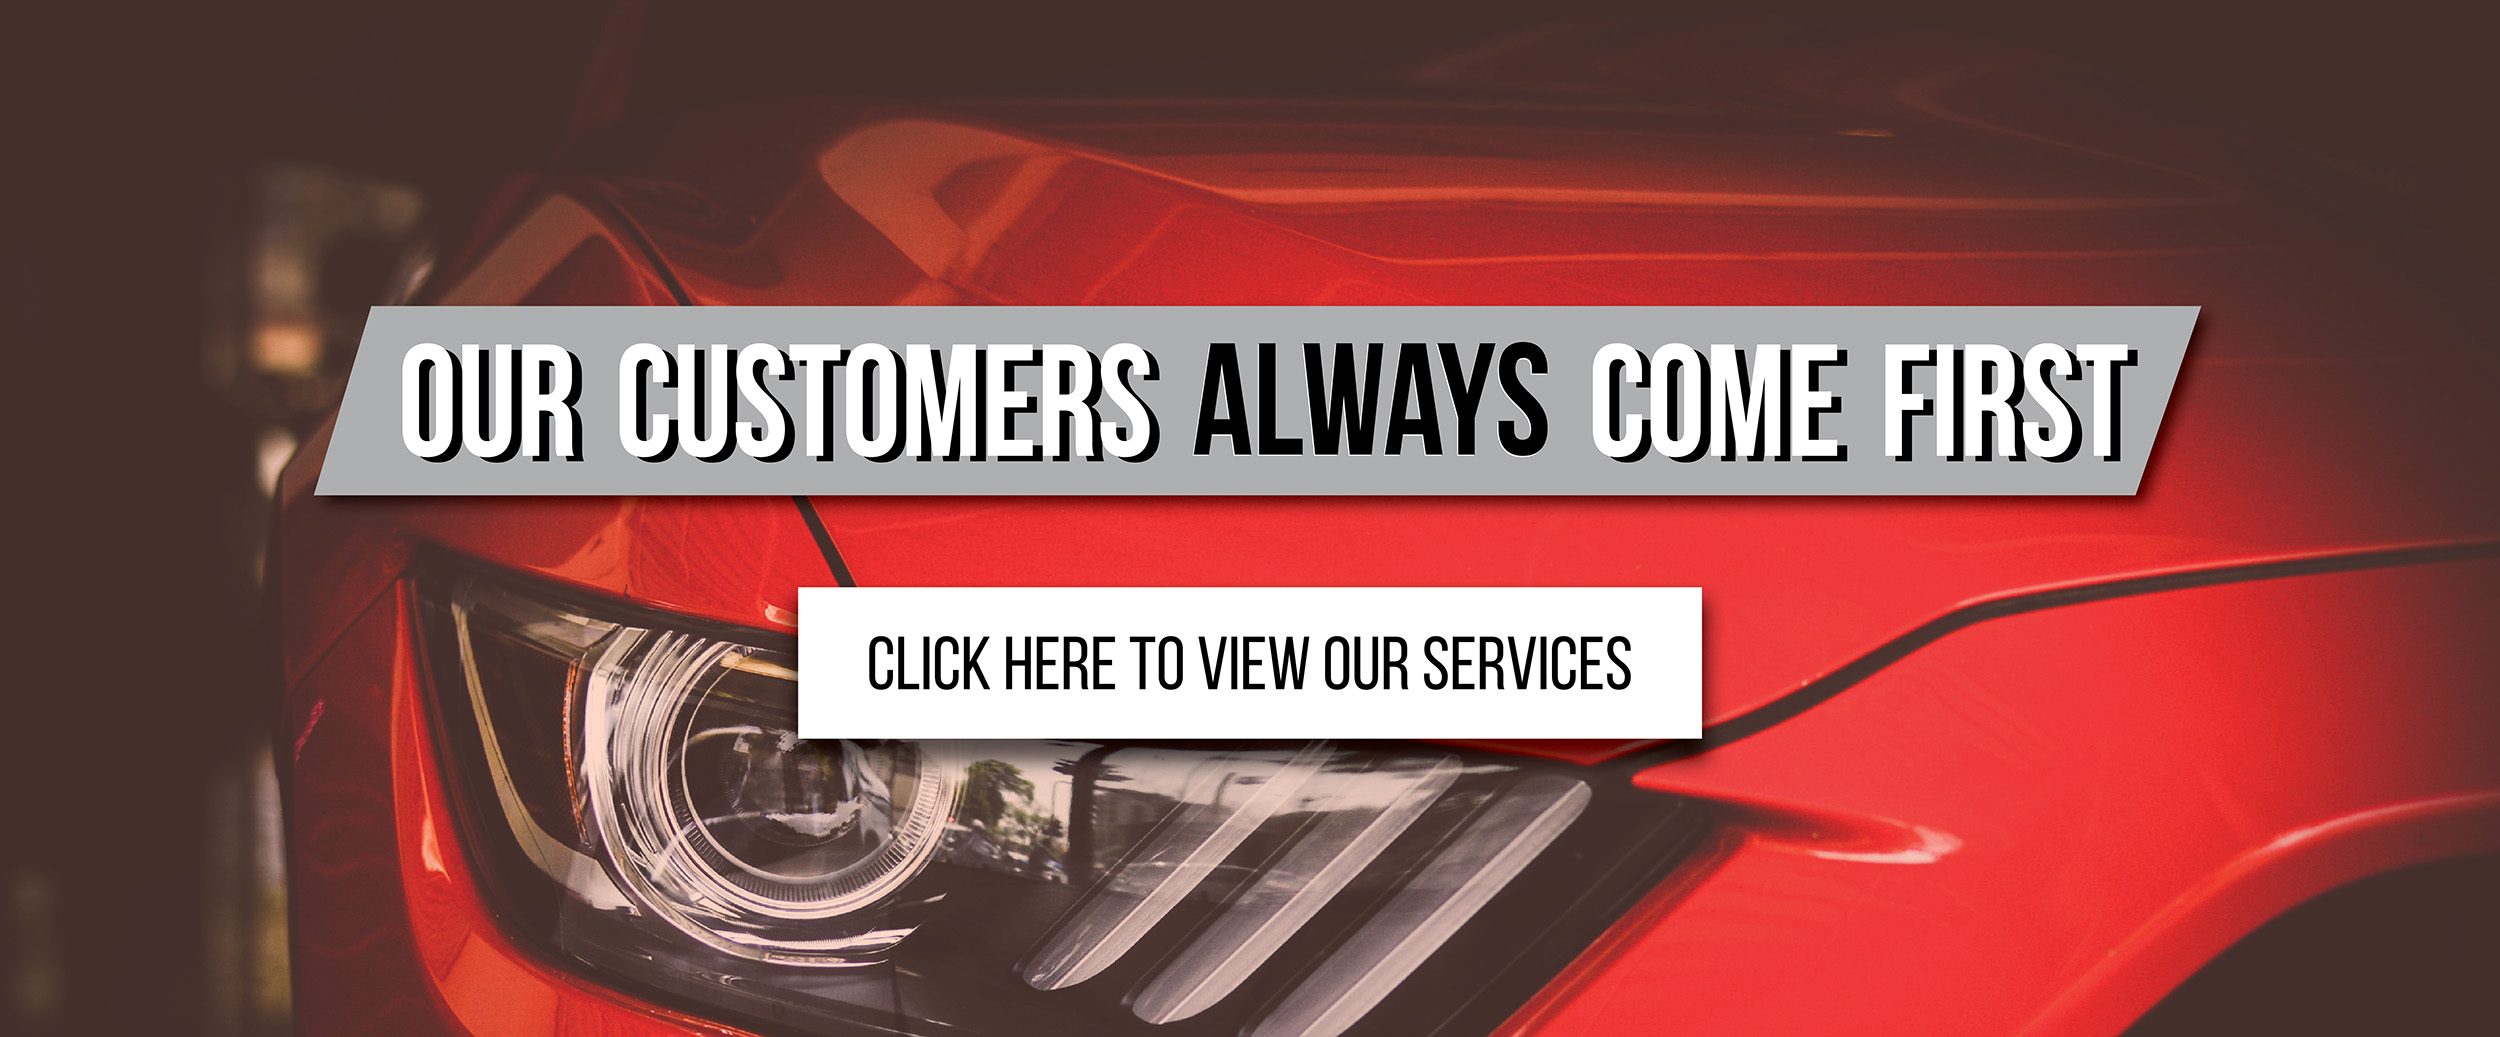 Our Customers Always Come First - Click here to view our services